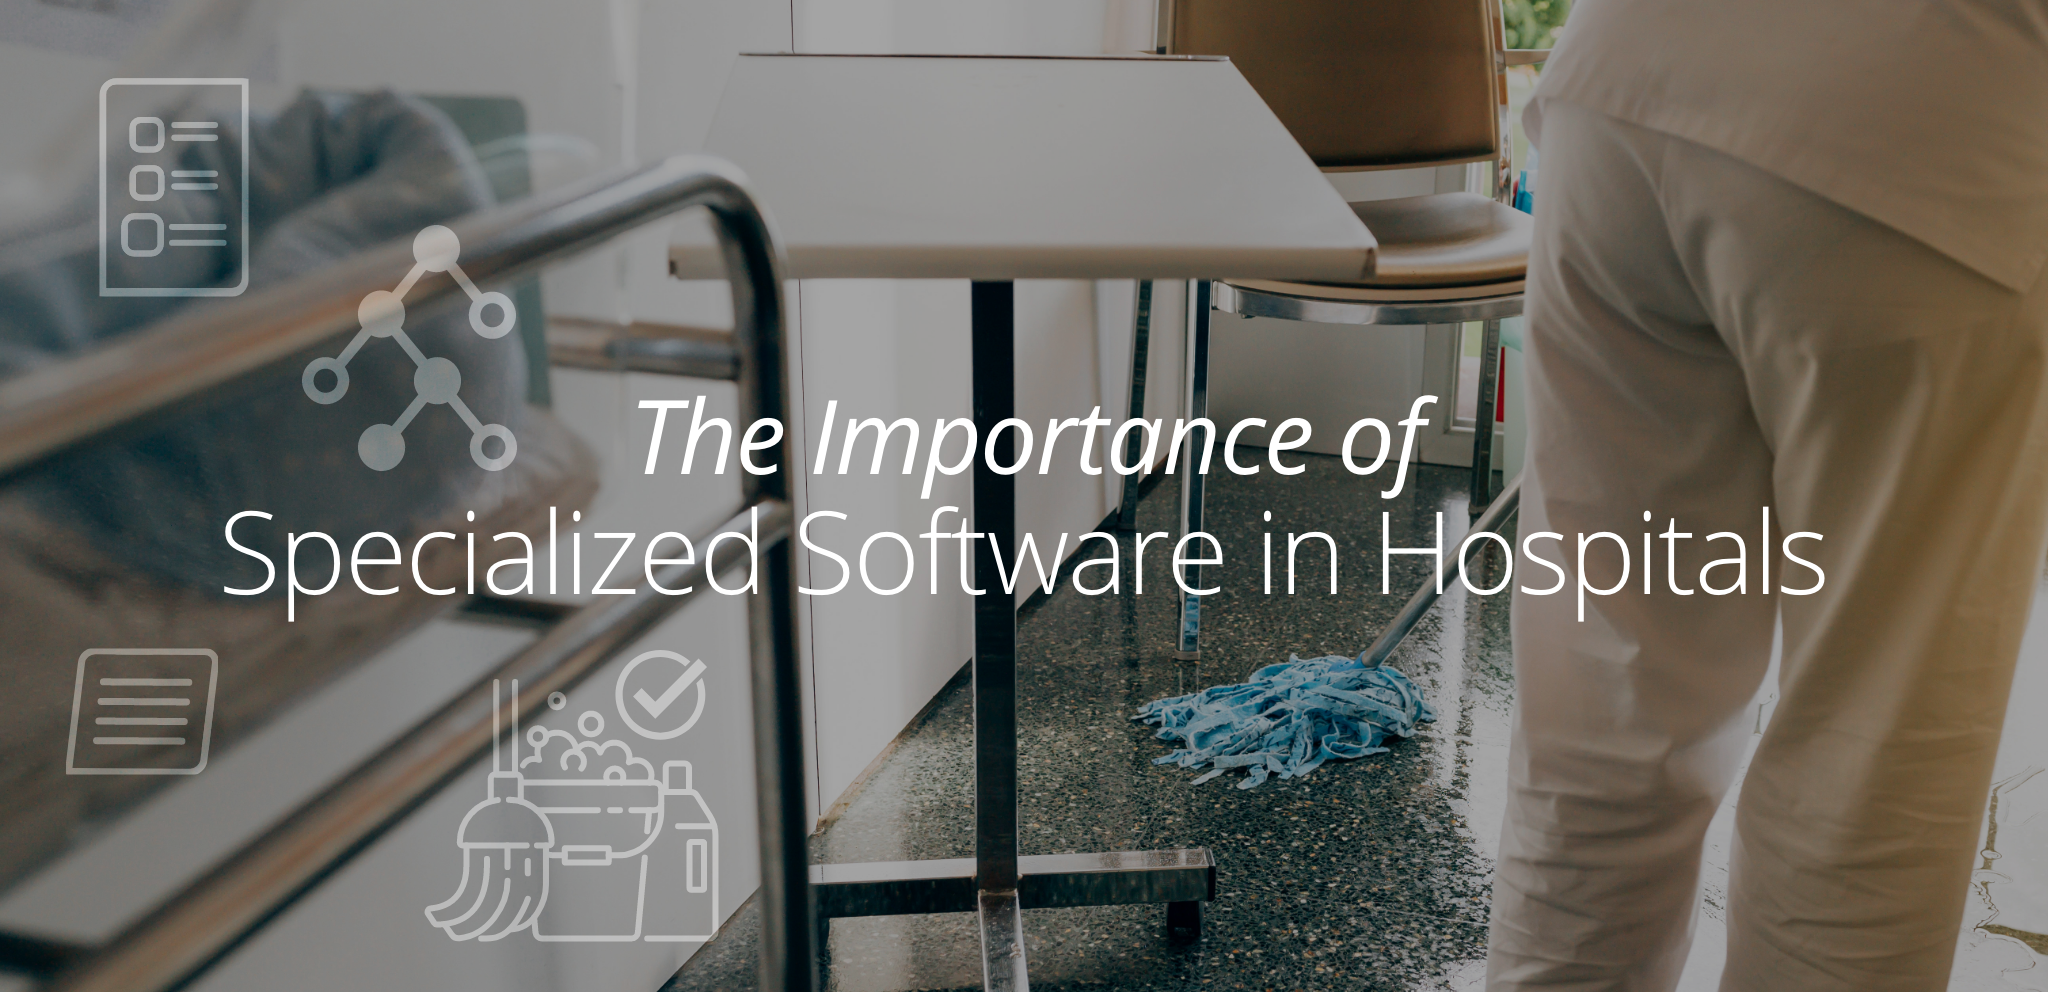 The Importance of Specialized Software in Hospitals